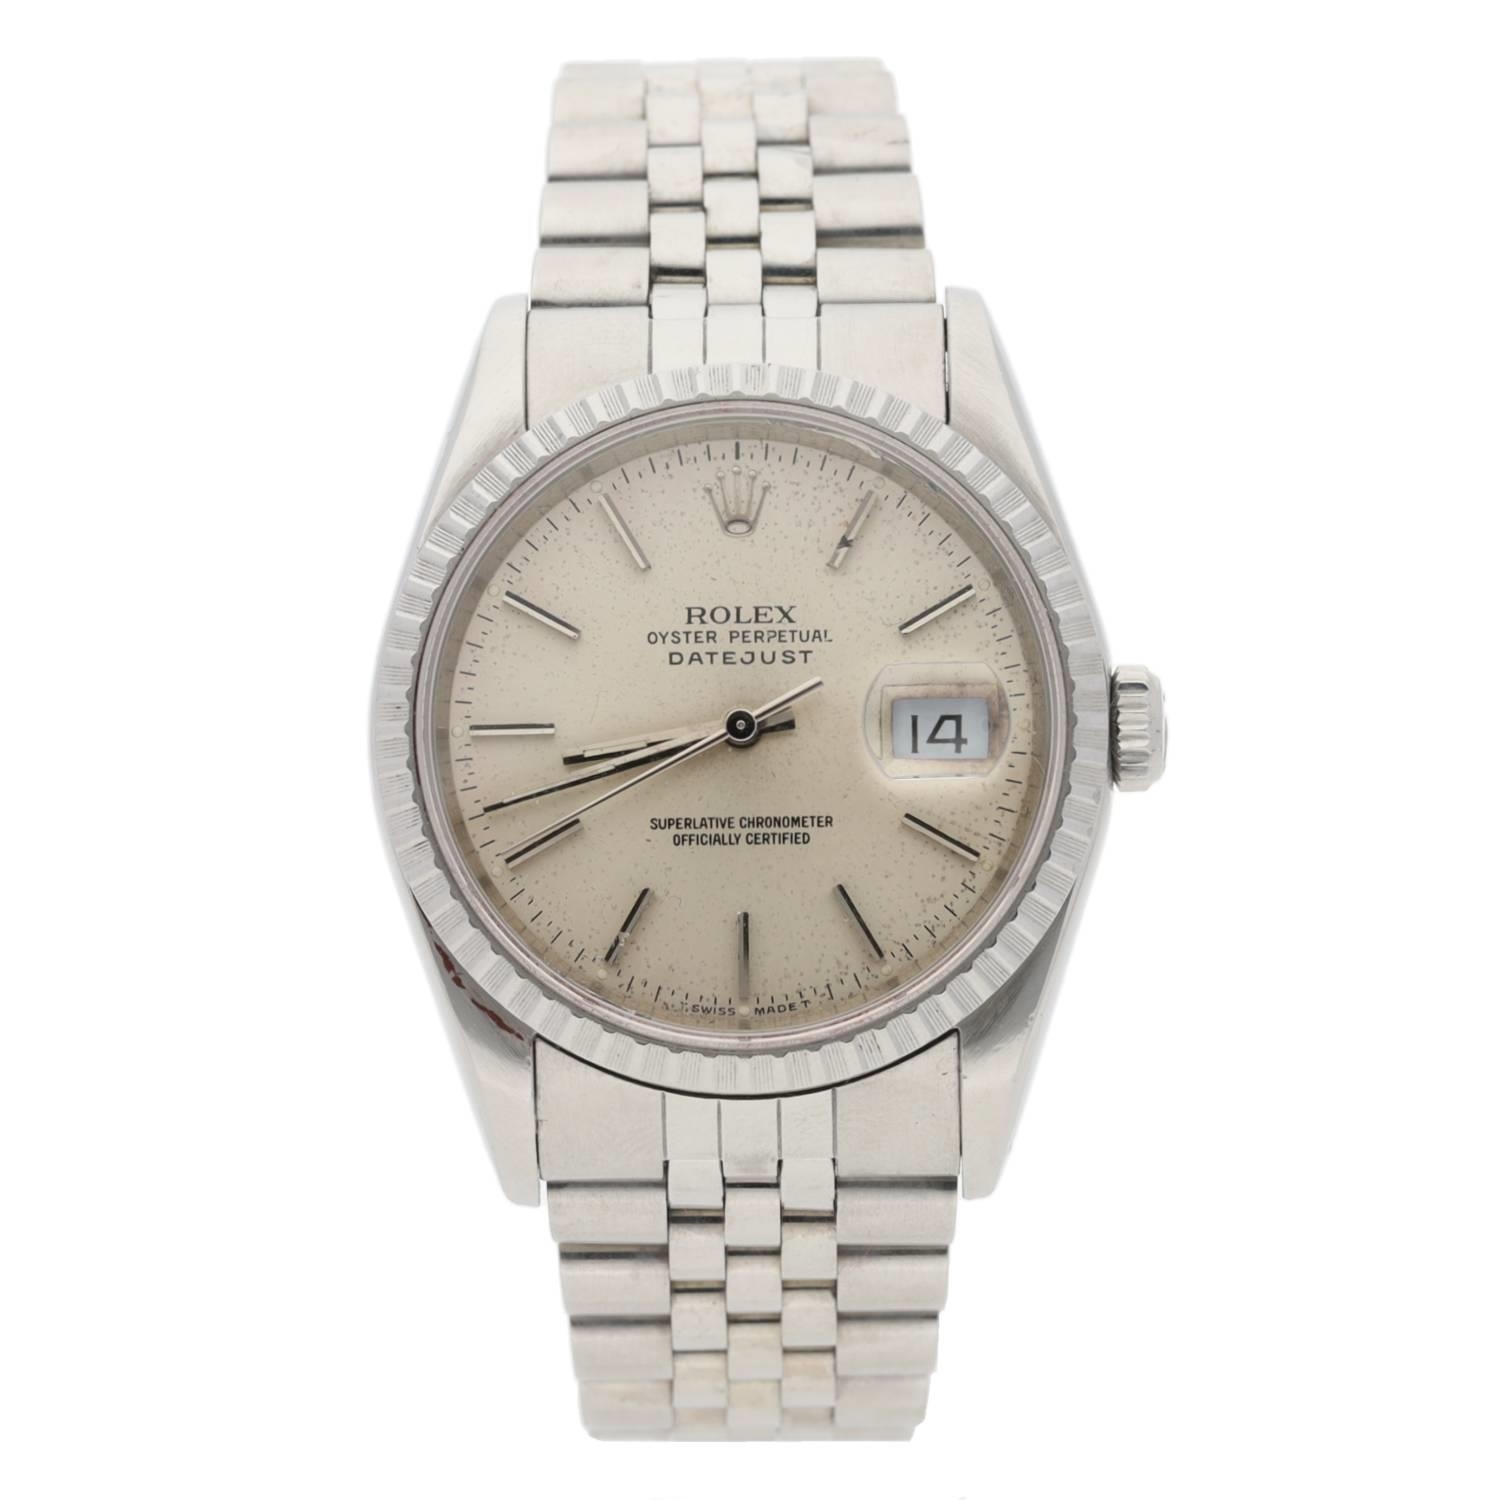 Rolex Oyster Perpetual Datejust stainless steel gentleman's wristwatch, reference no. 16220,